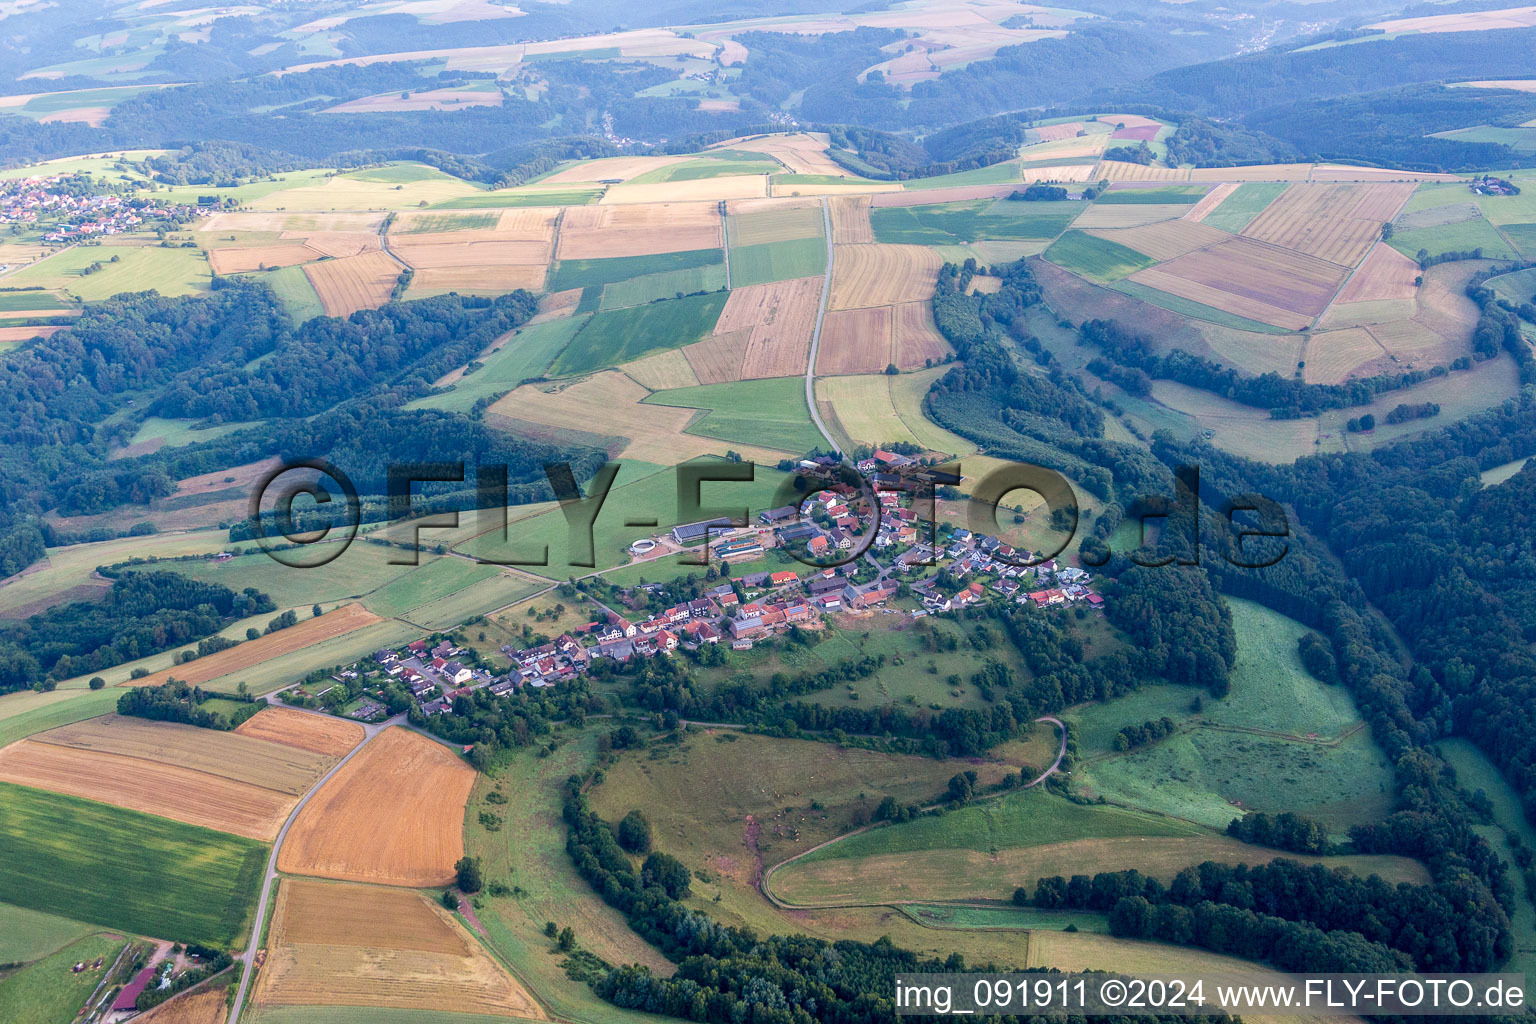 Village - view on the edge of agricultural fields and farmland in Schauerberg in the state Rhineland-Palatinate, Germany